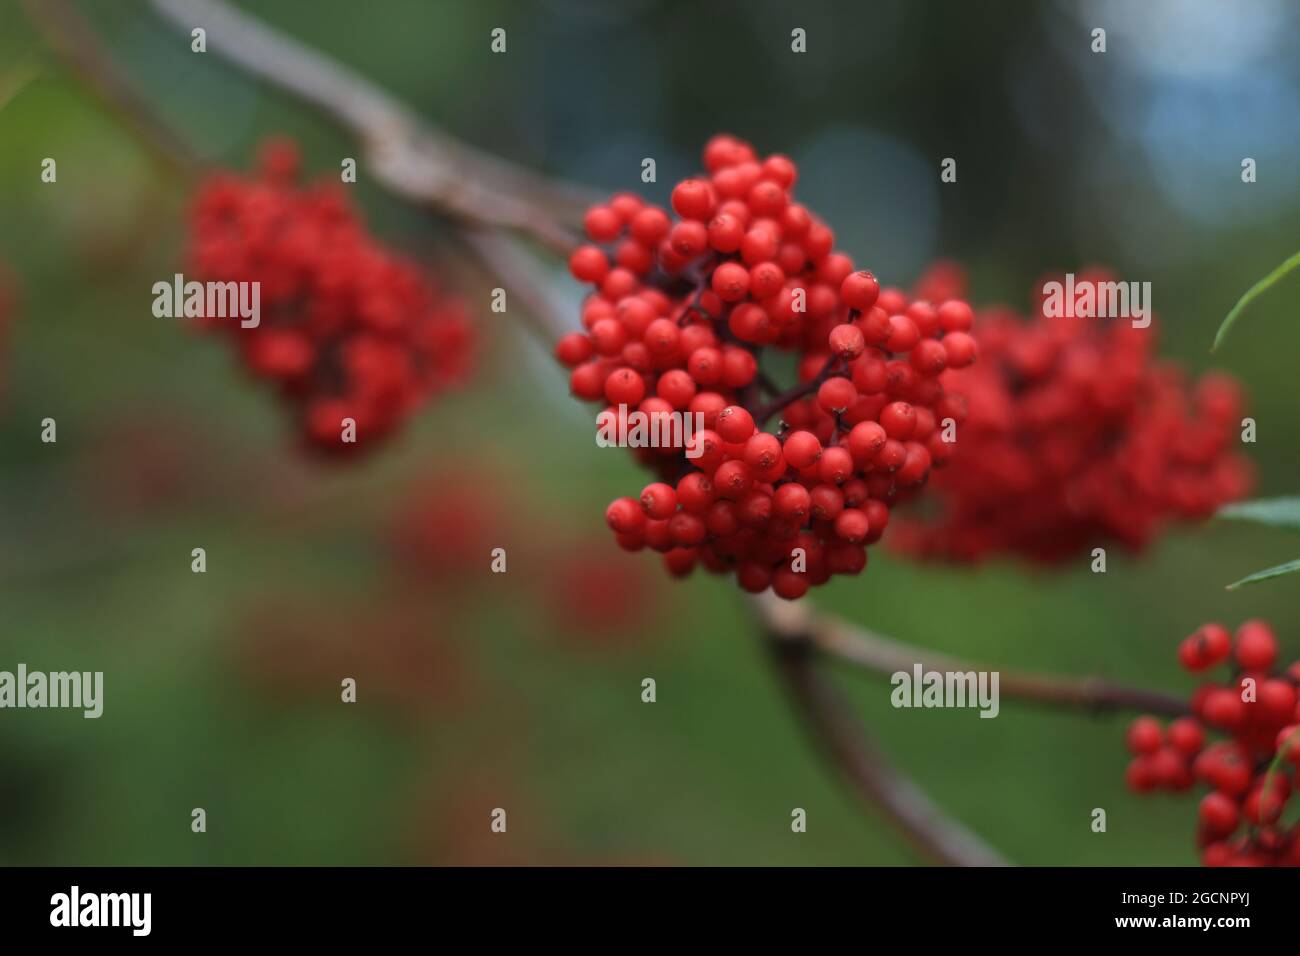 Sambucus racemosa, red elderberry, red-berried elder. A bunch of red elderberries close-up against a background of green foliage. Stock Photo